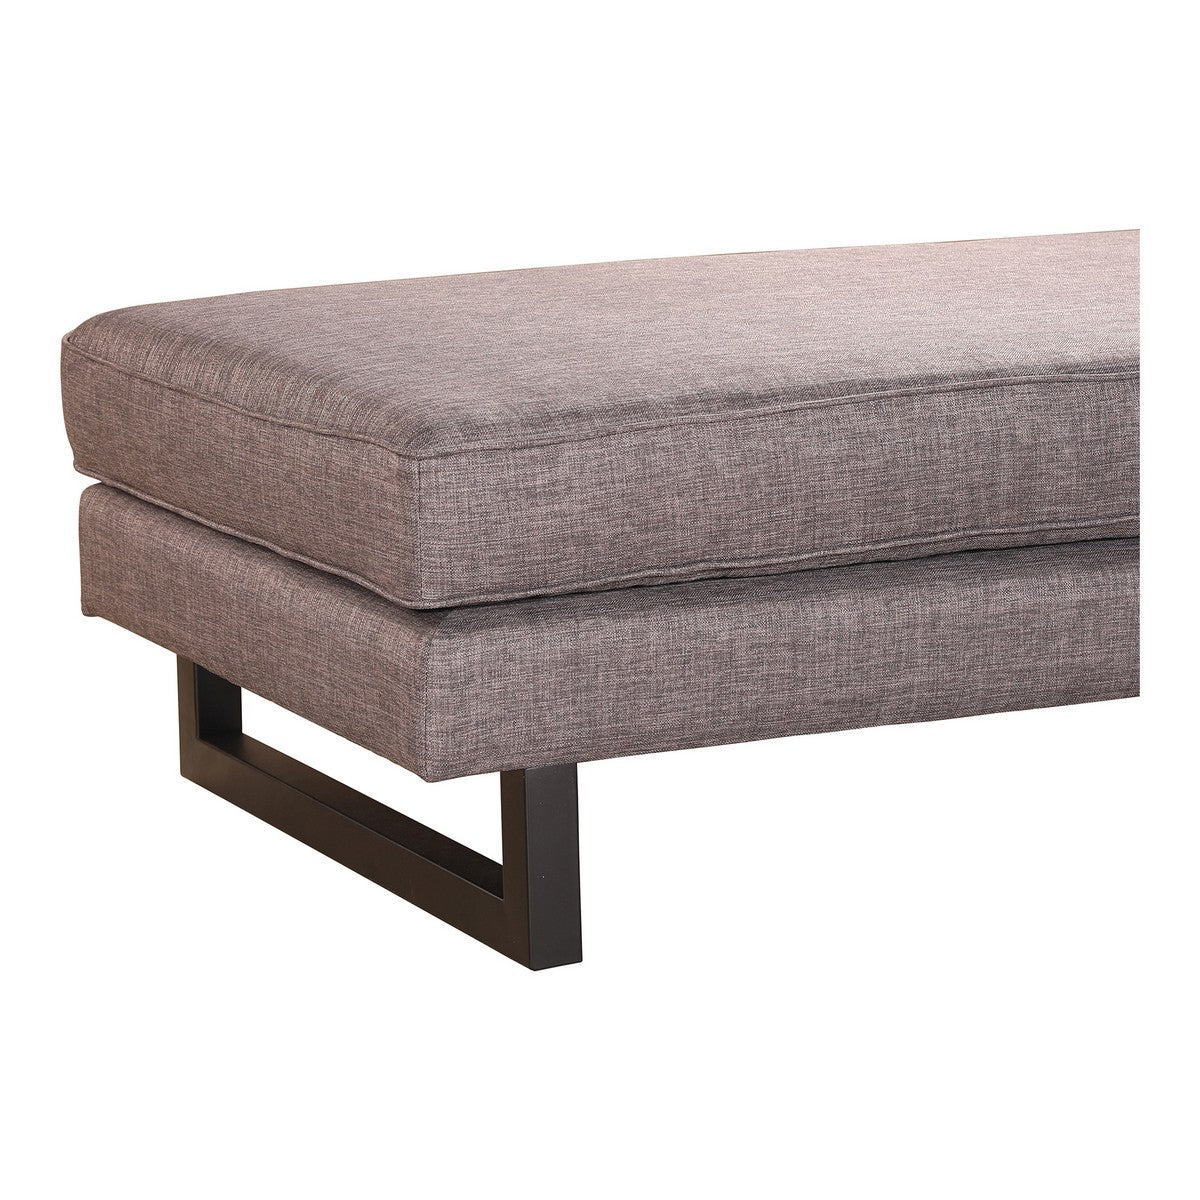 Moe's Home Collection Amadeo Daybed Grey - RN-1037-35